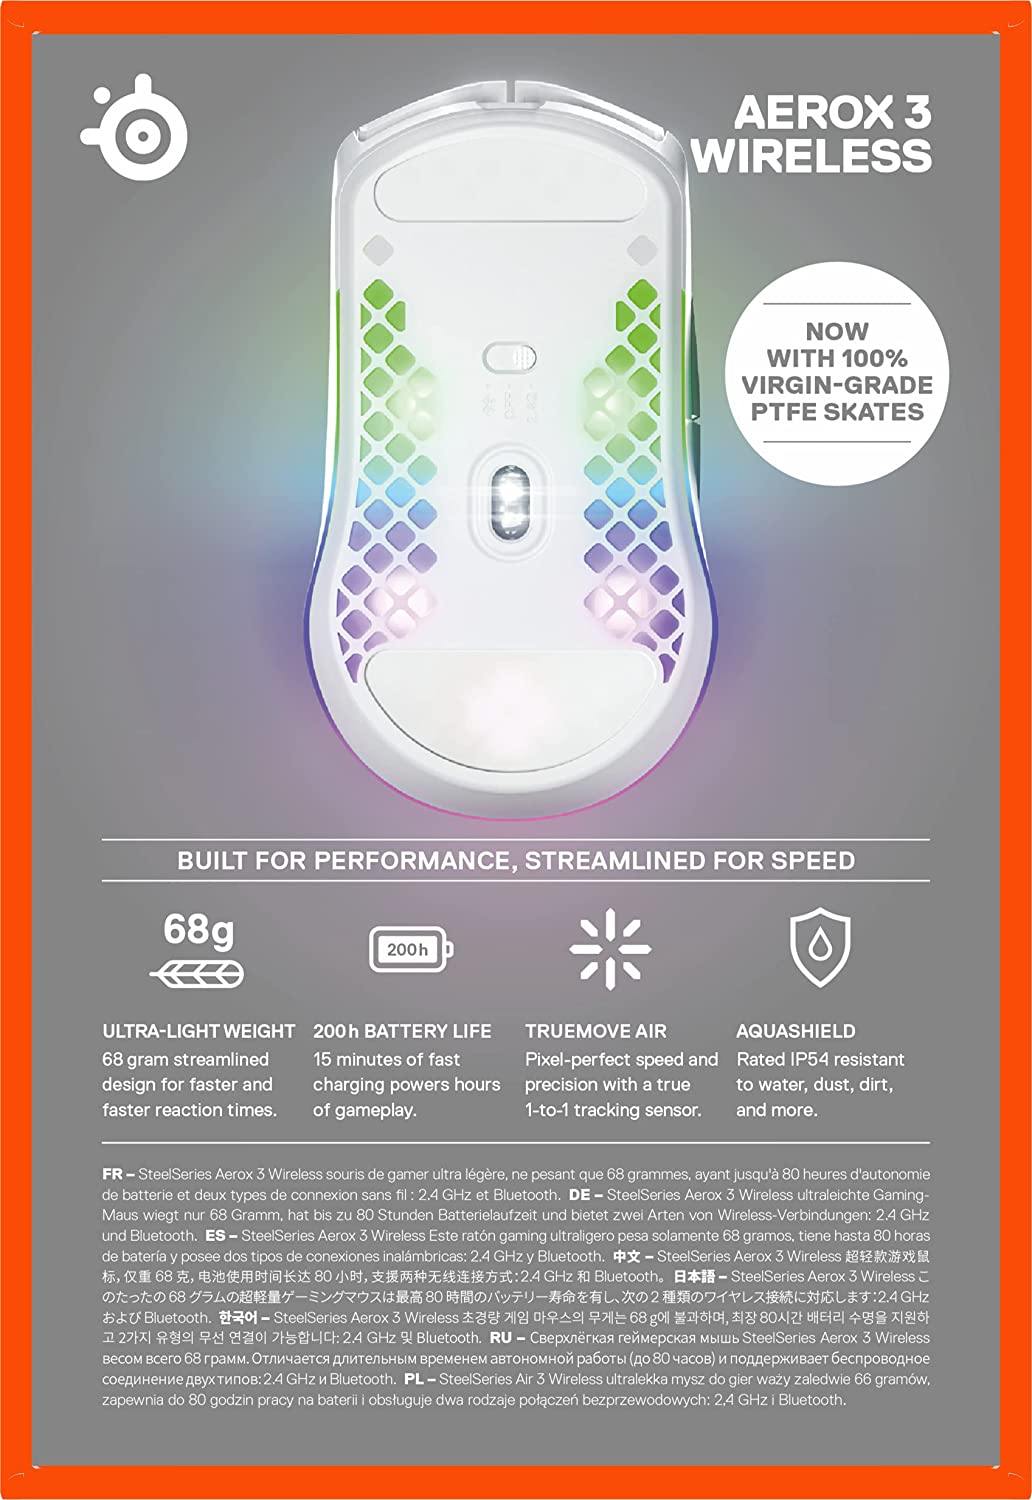 SteelSeries Aerox 3 Wireless Ultra Lightweight Gaming Mouse - Snow